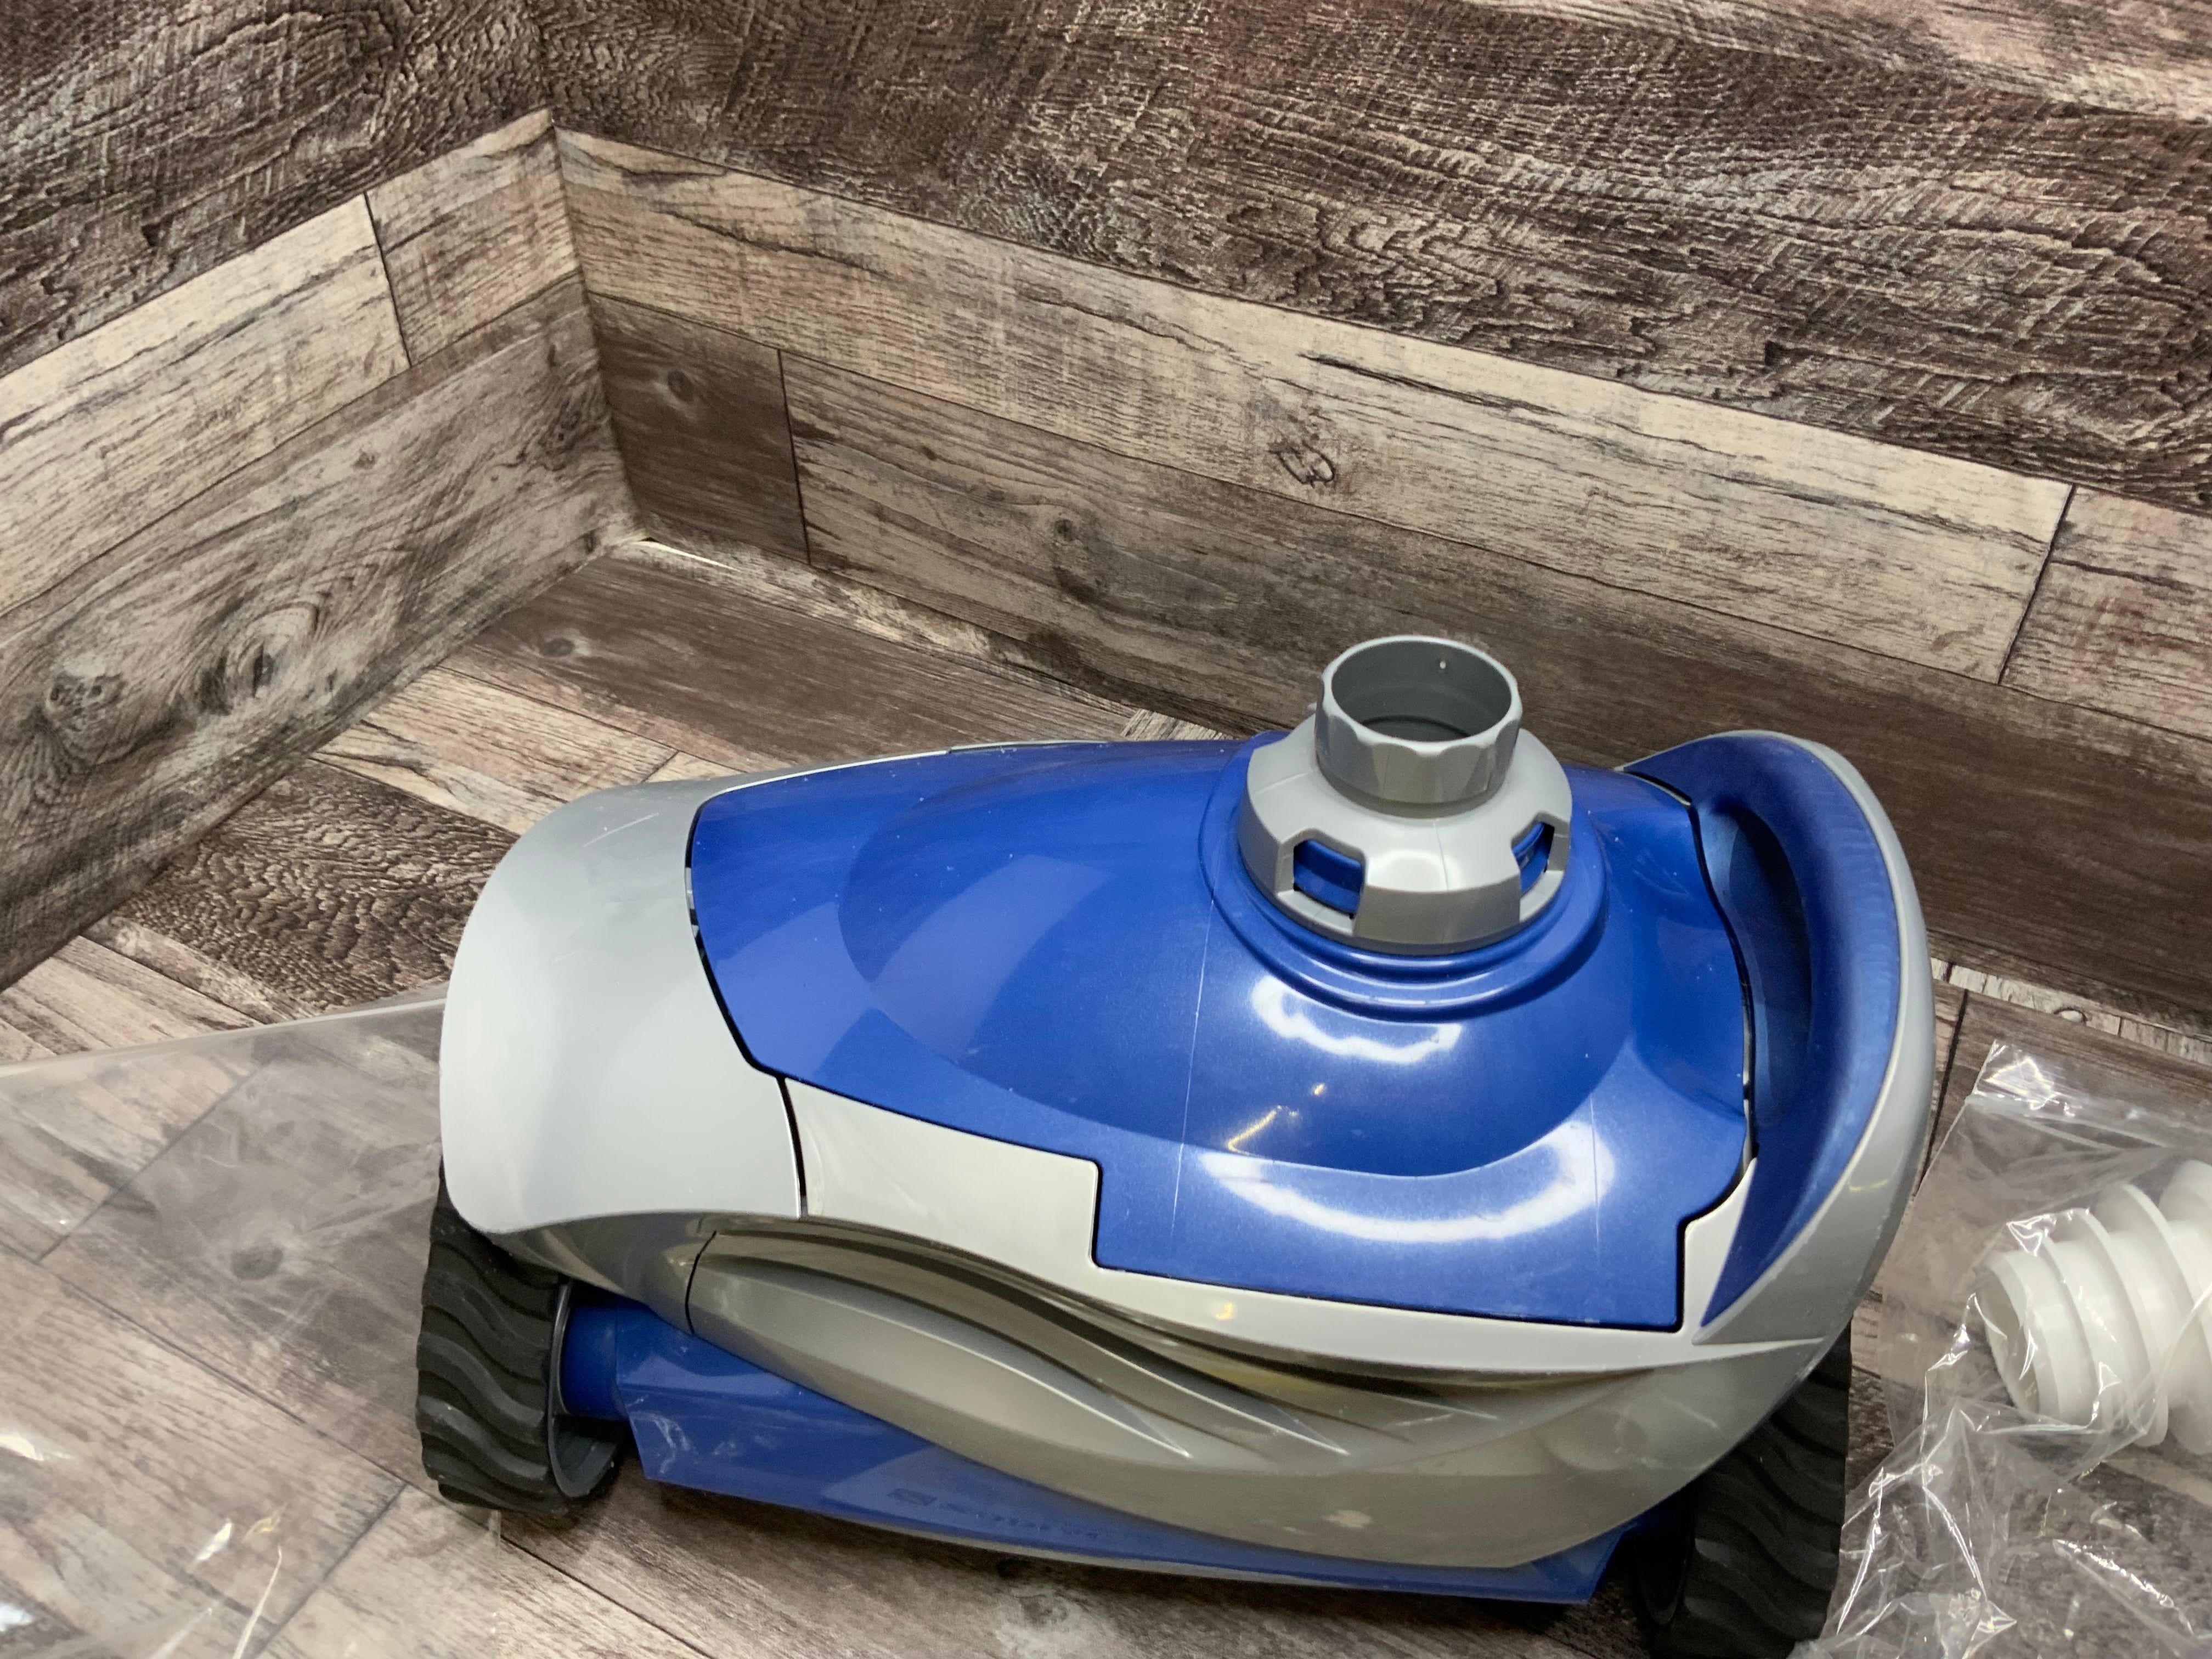 Zodiac MX6 Automatic Suction-Side Pool Cleaner Vacuum **FOR PARTS/READ** (8073531588846)